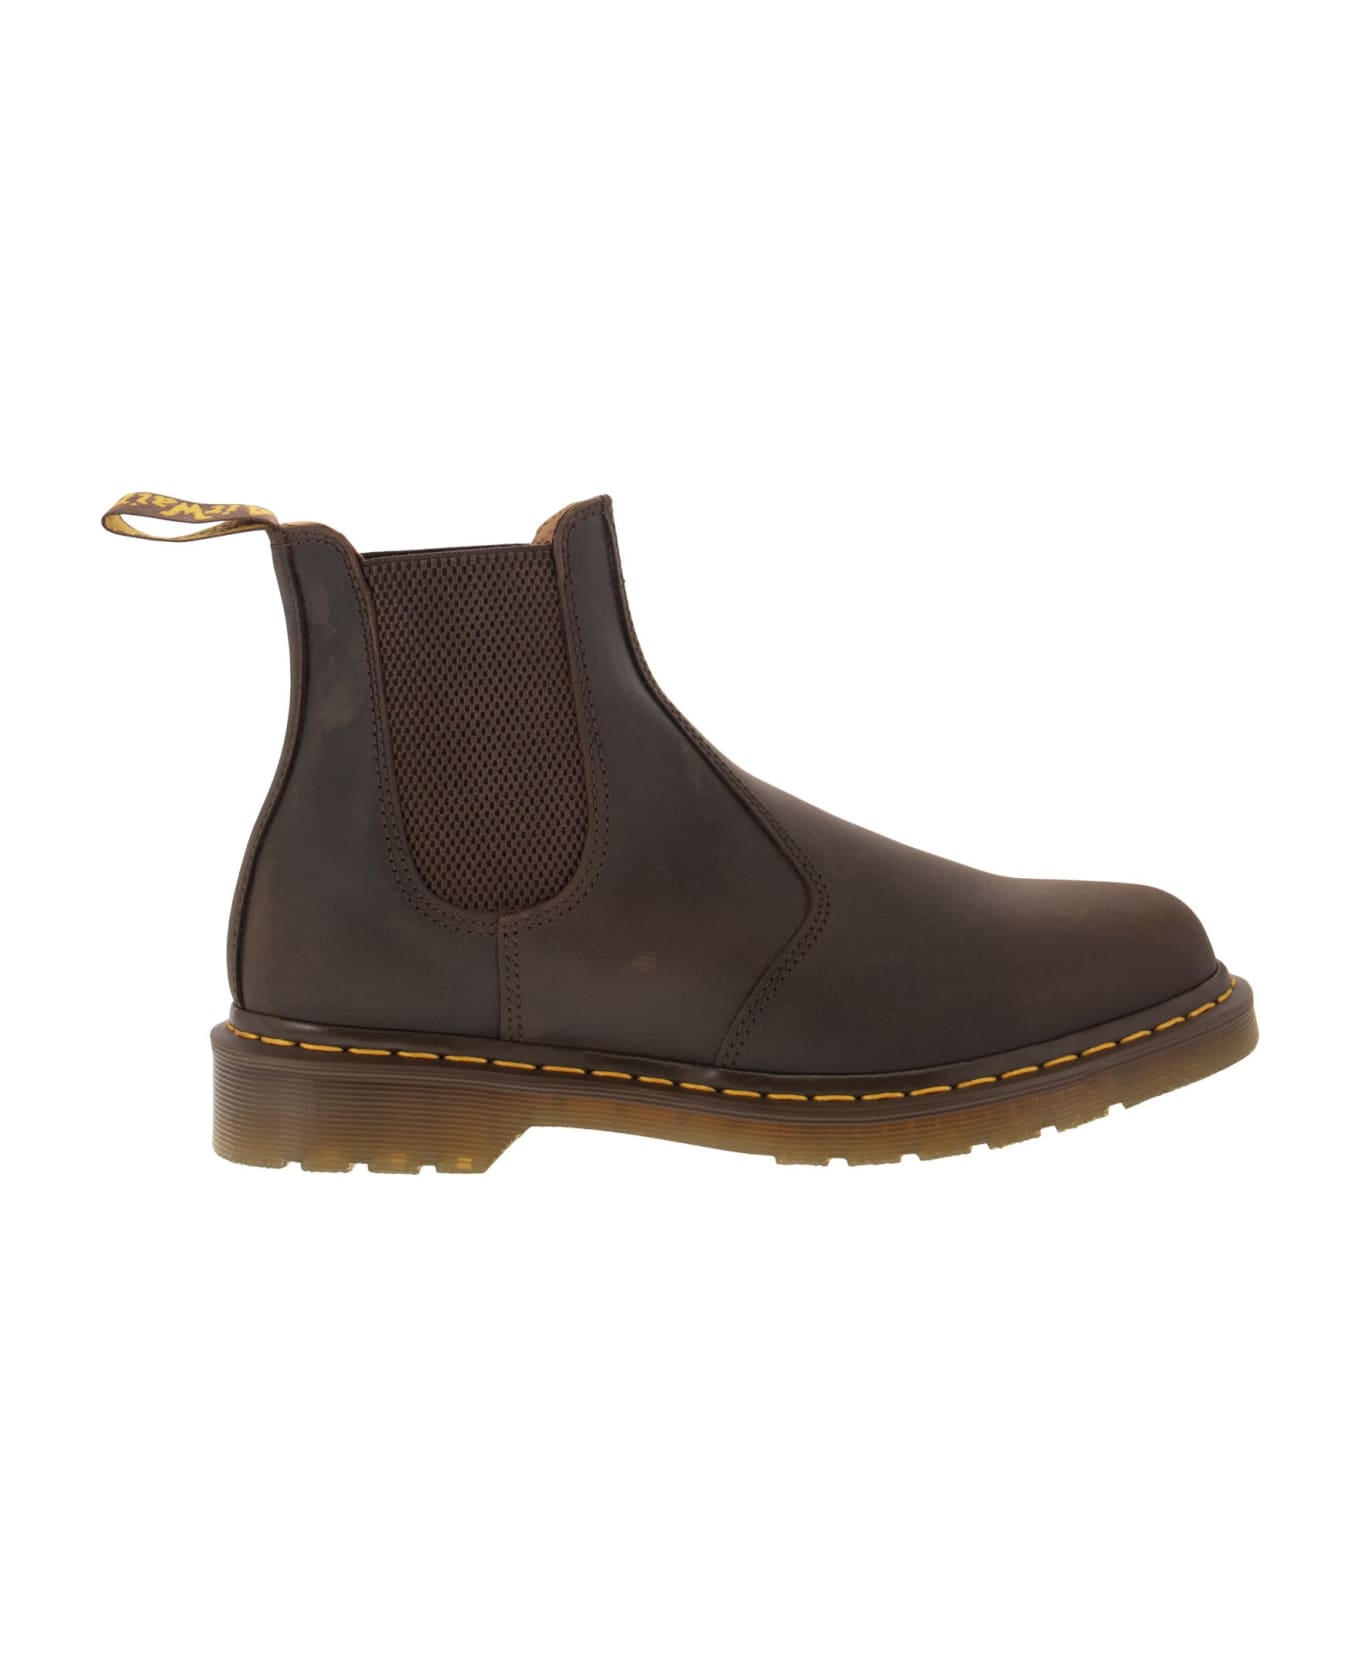 Dr. Martens 2976 Crazy Horse Chelsea Boot - Brown